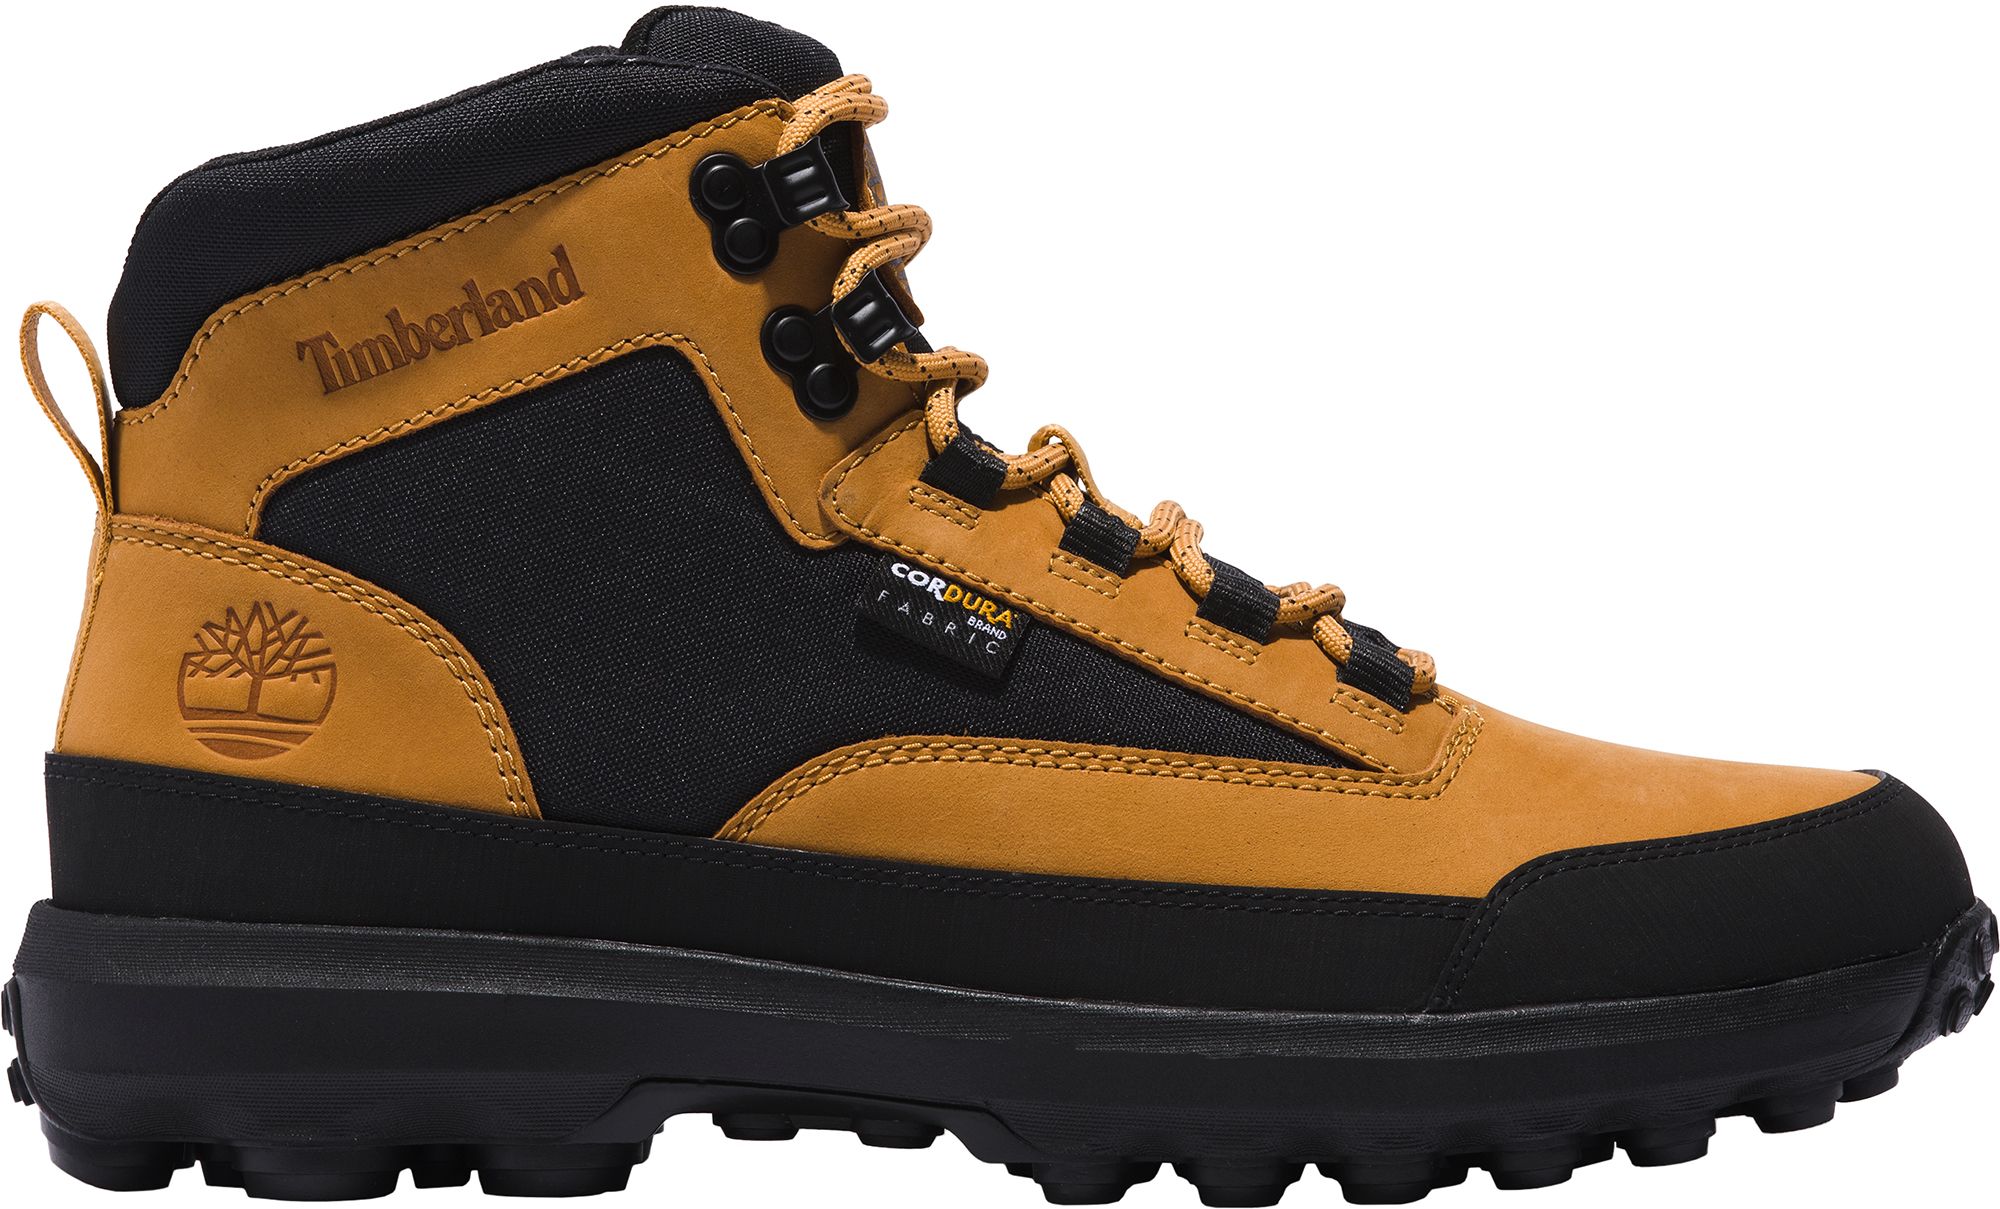 Timberland Mens Converge Hiking Boots